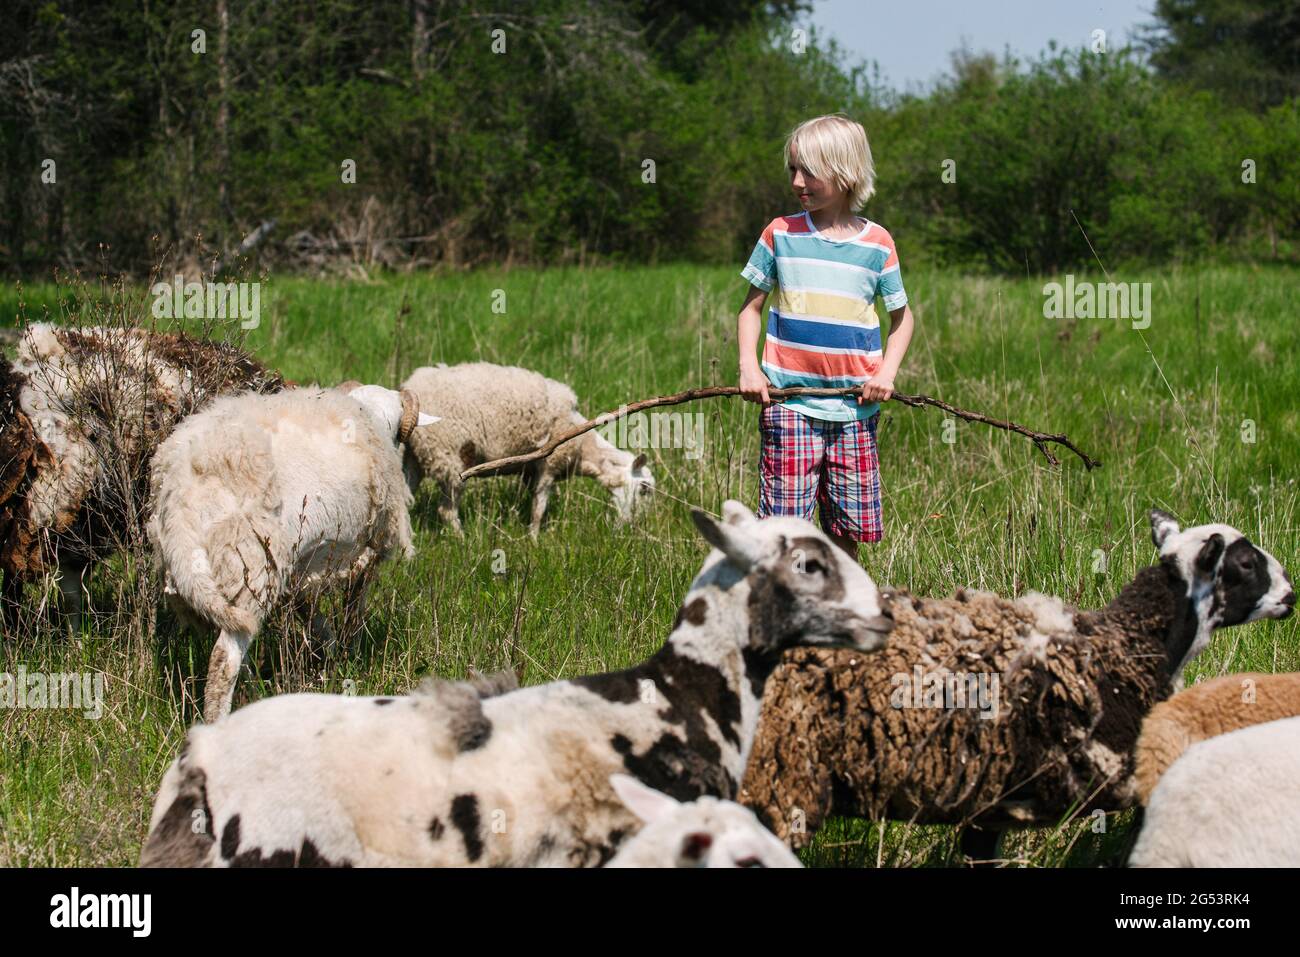 Canada, Ontario, Kingston, Boy (8-9) with sheep in field Stock Photo